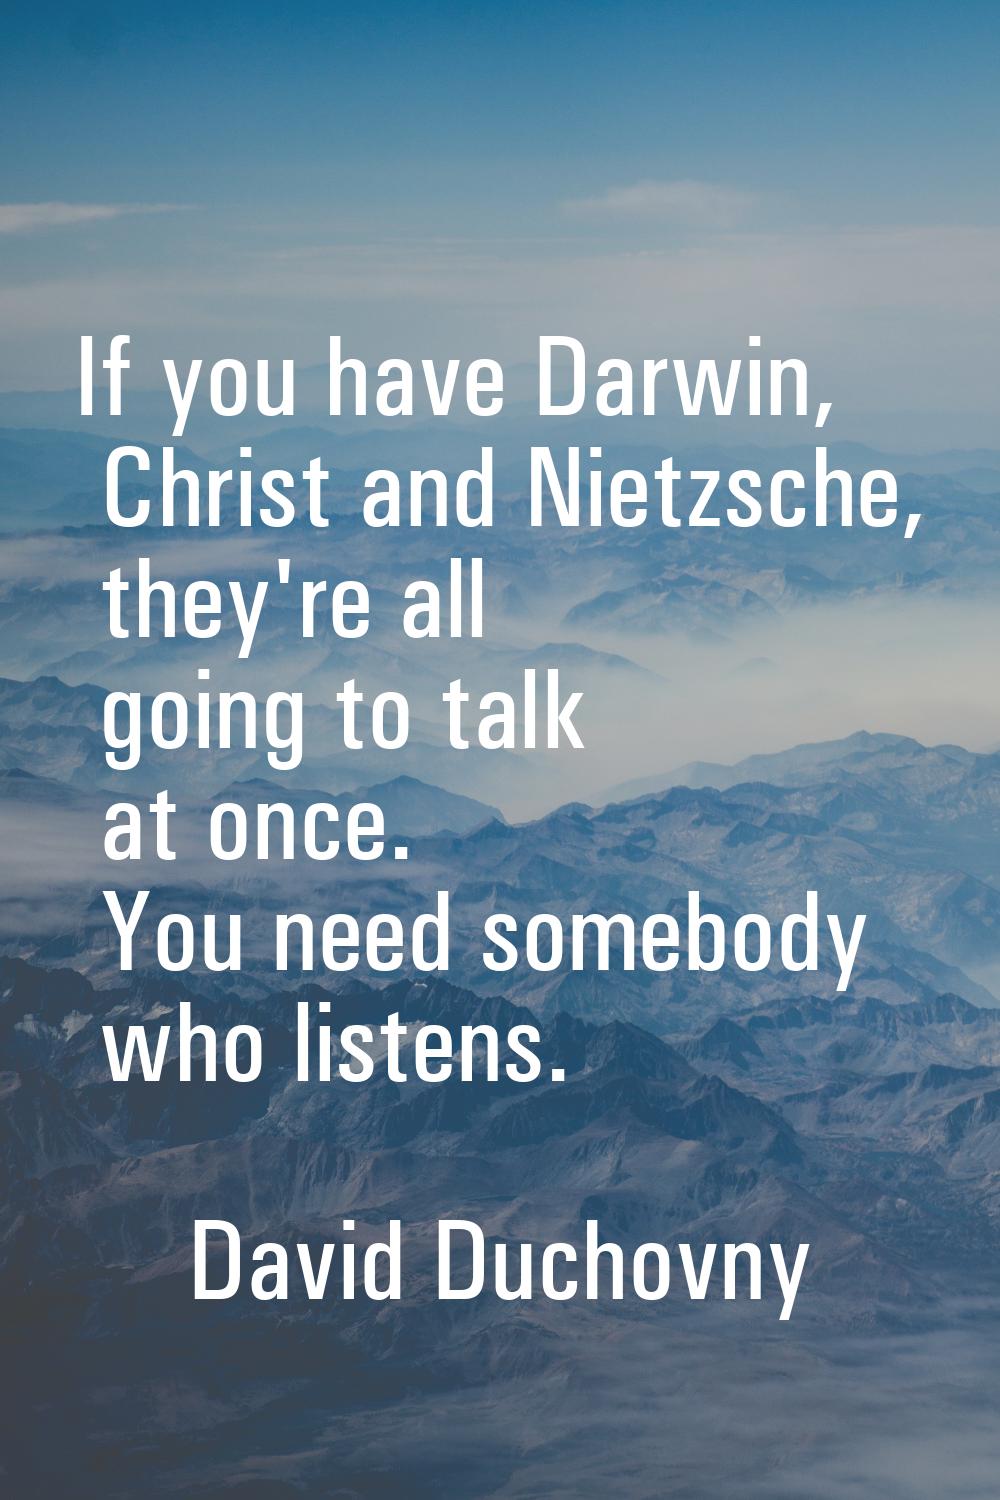 If you have Darwin, Christ and Nietzsche, they're all going to talk at once. You need somebody who 